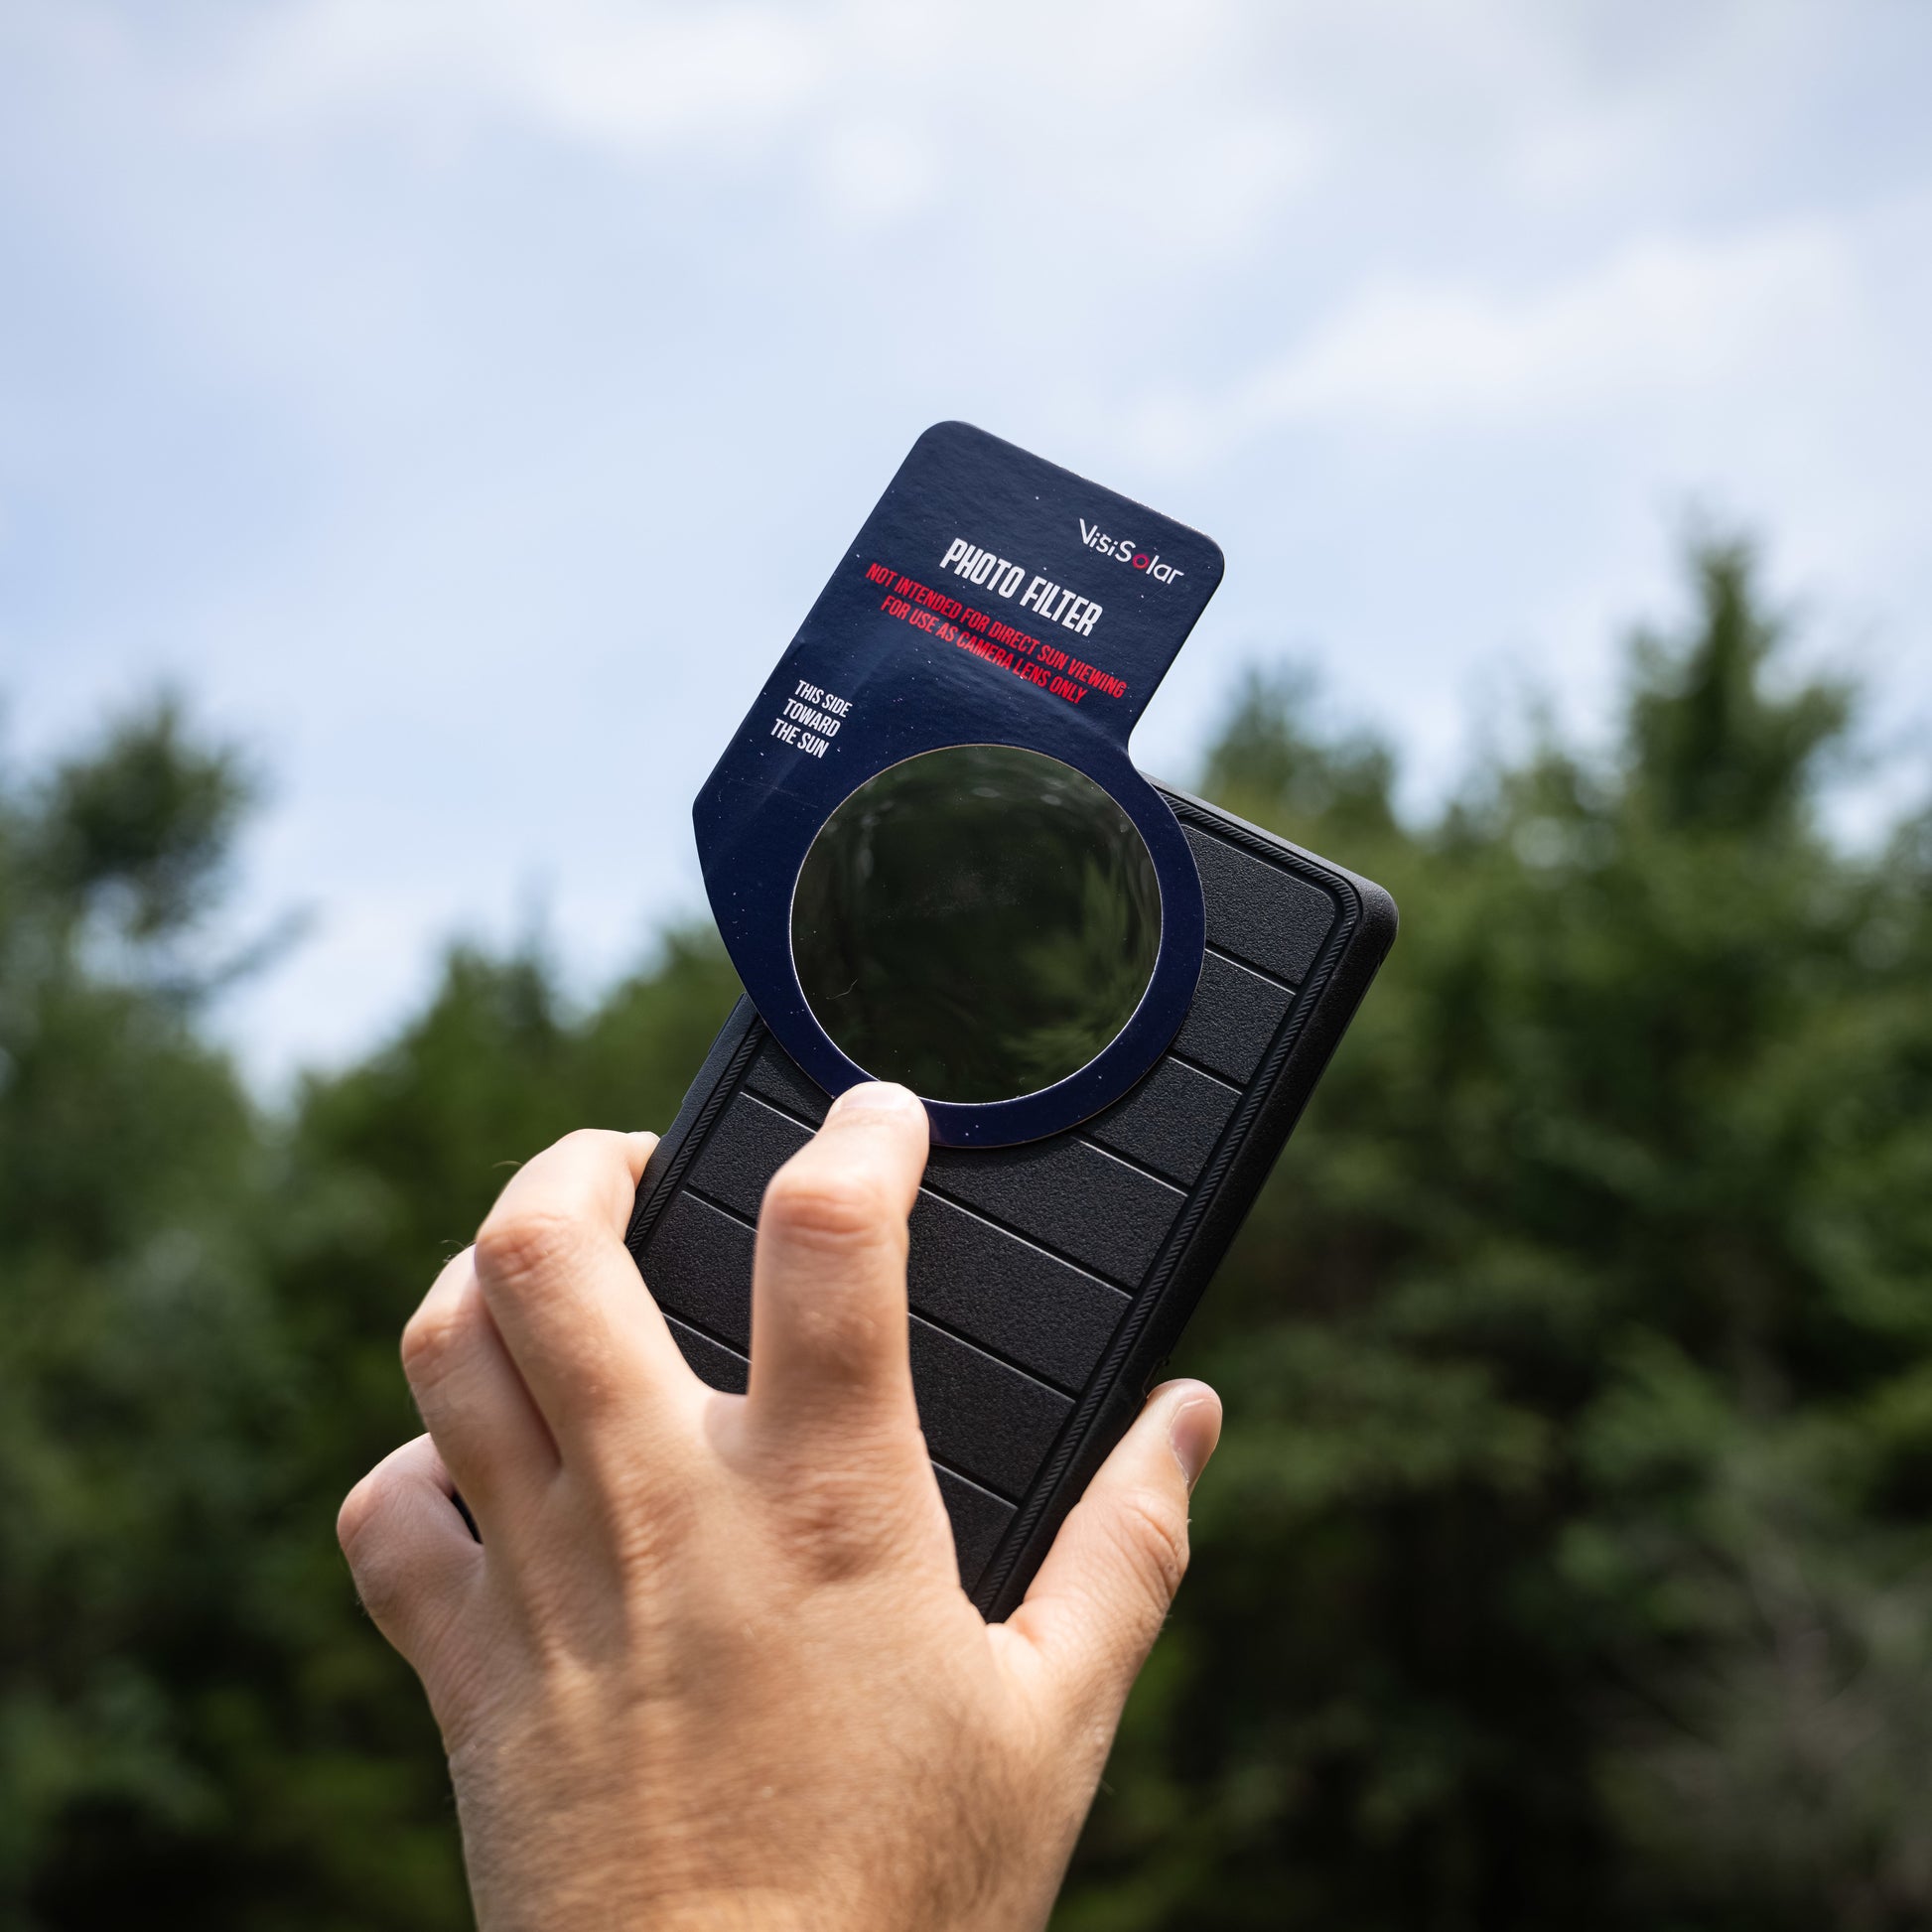 Eclipsers™ ‎ Solar Eclipse Viewer Glasses